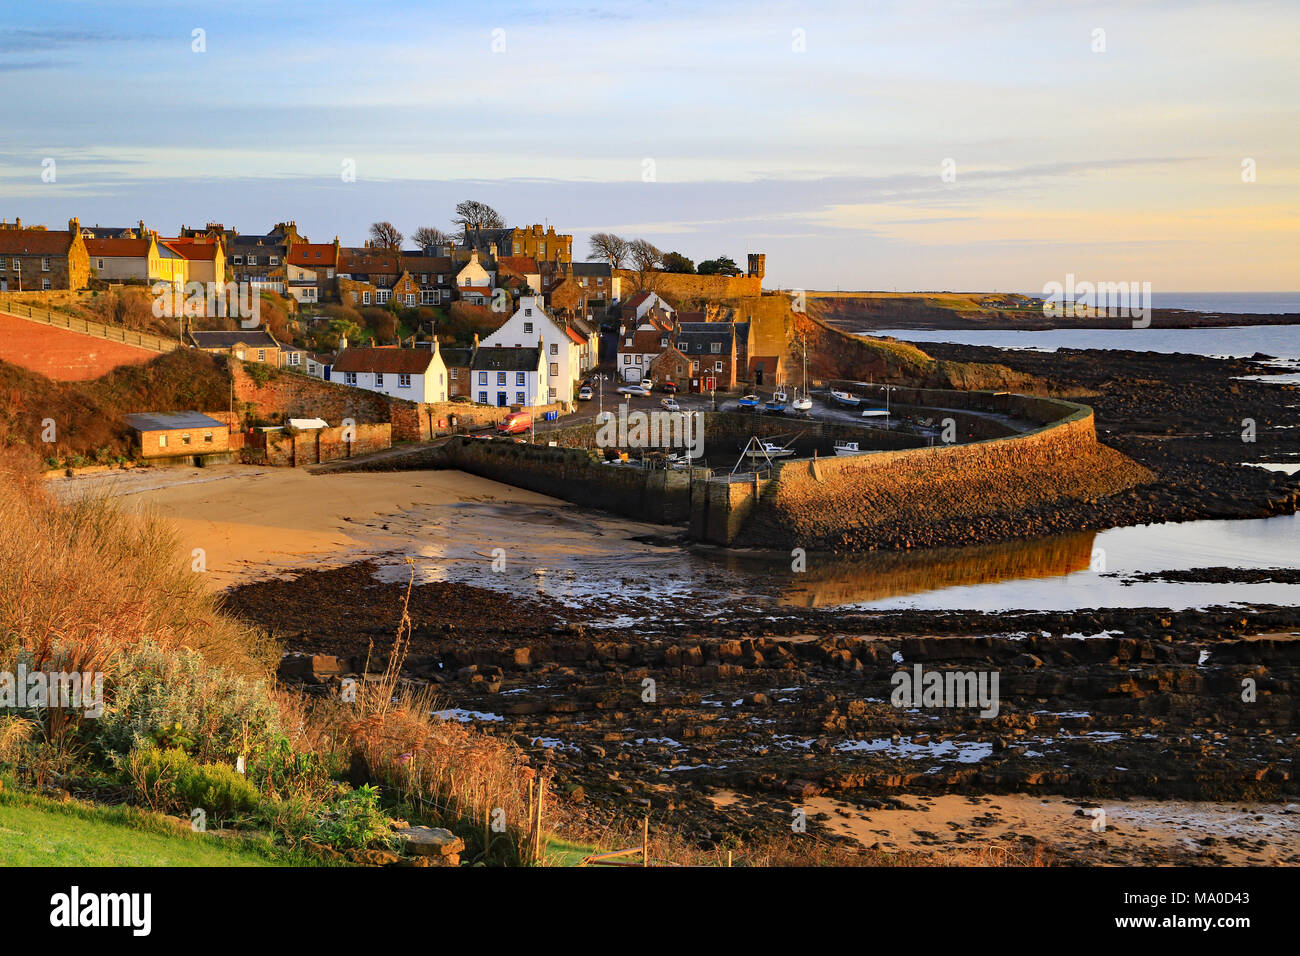 Crail Harbour in the East Neuk of Fife just as the first rays of sunshine hit the land as a new day dawns. Stock Photo